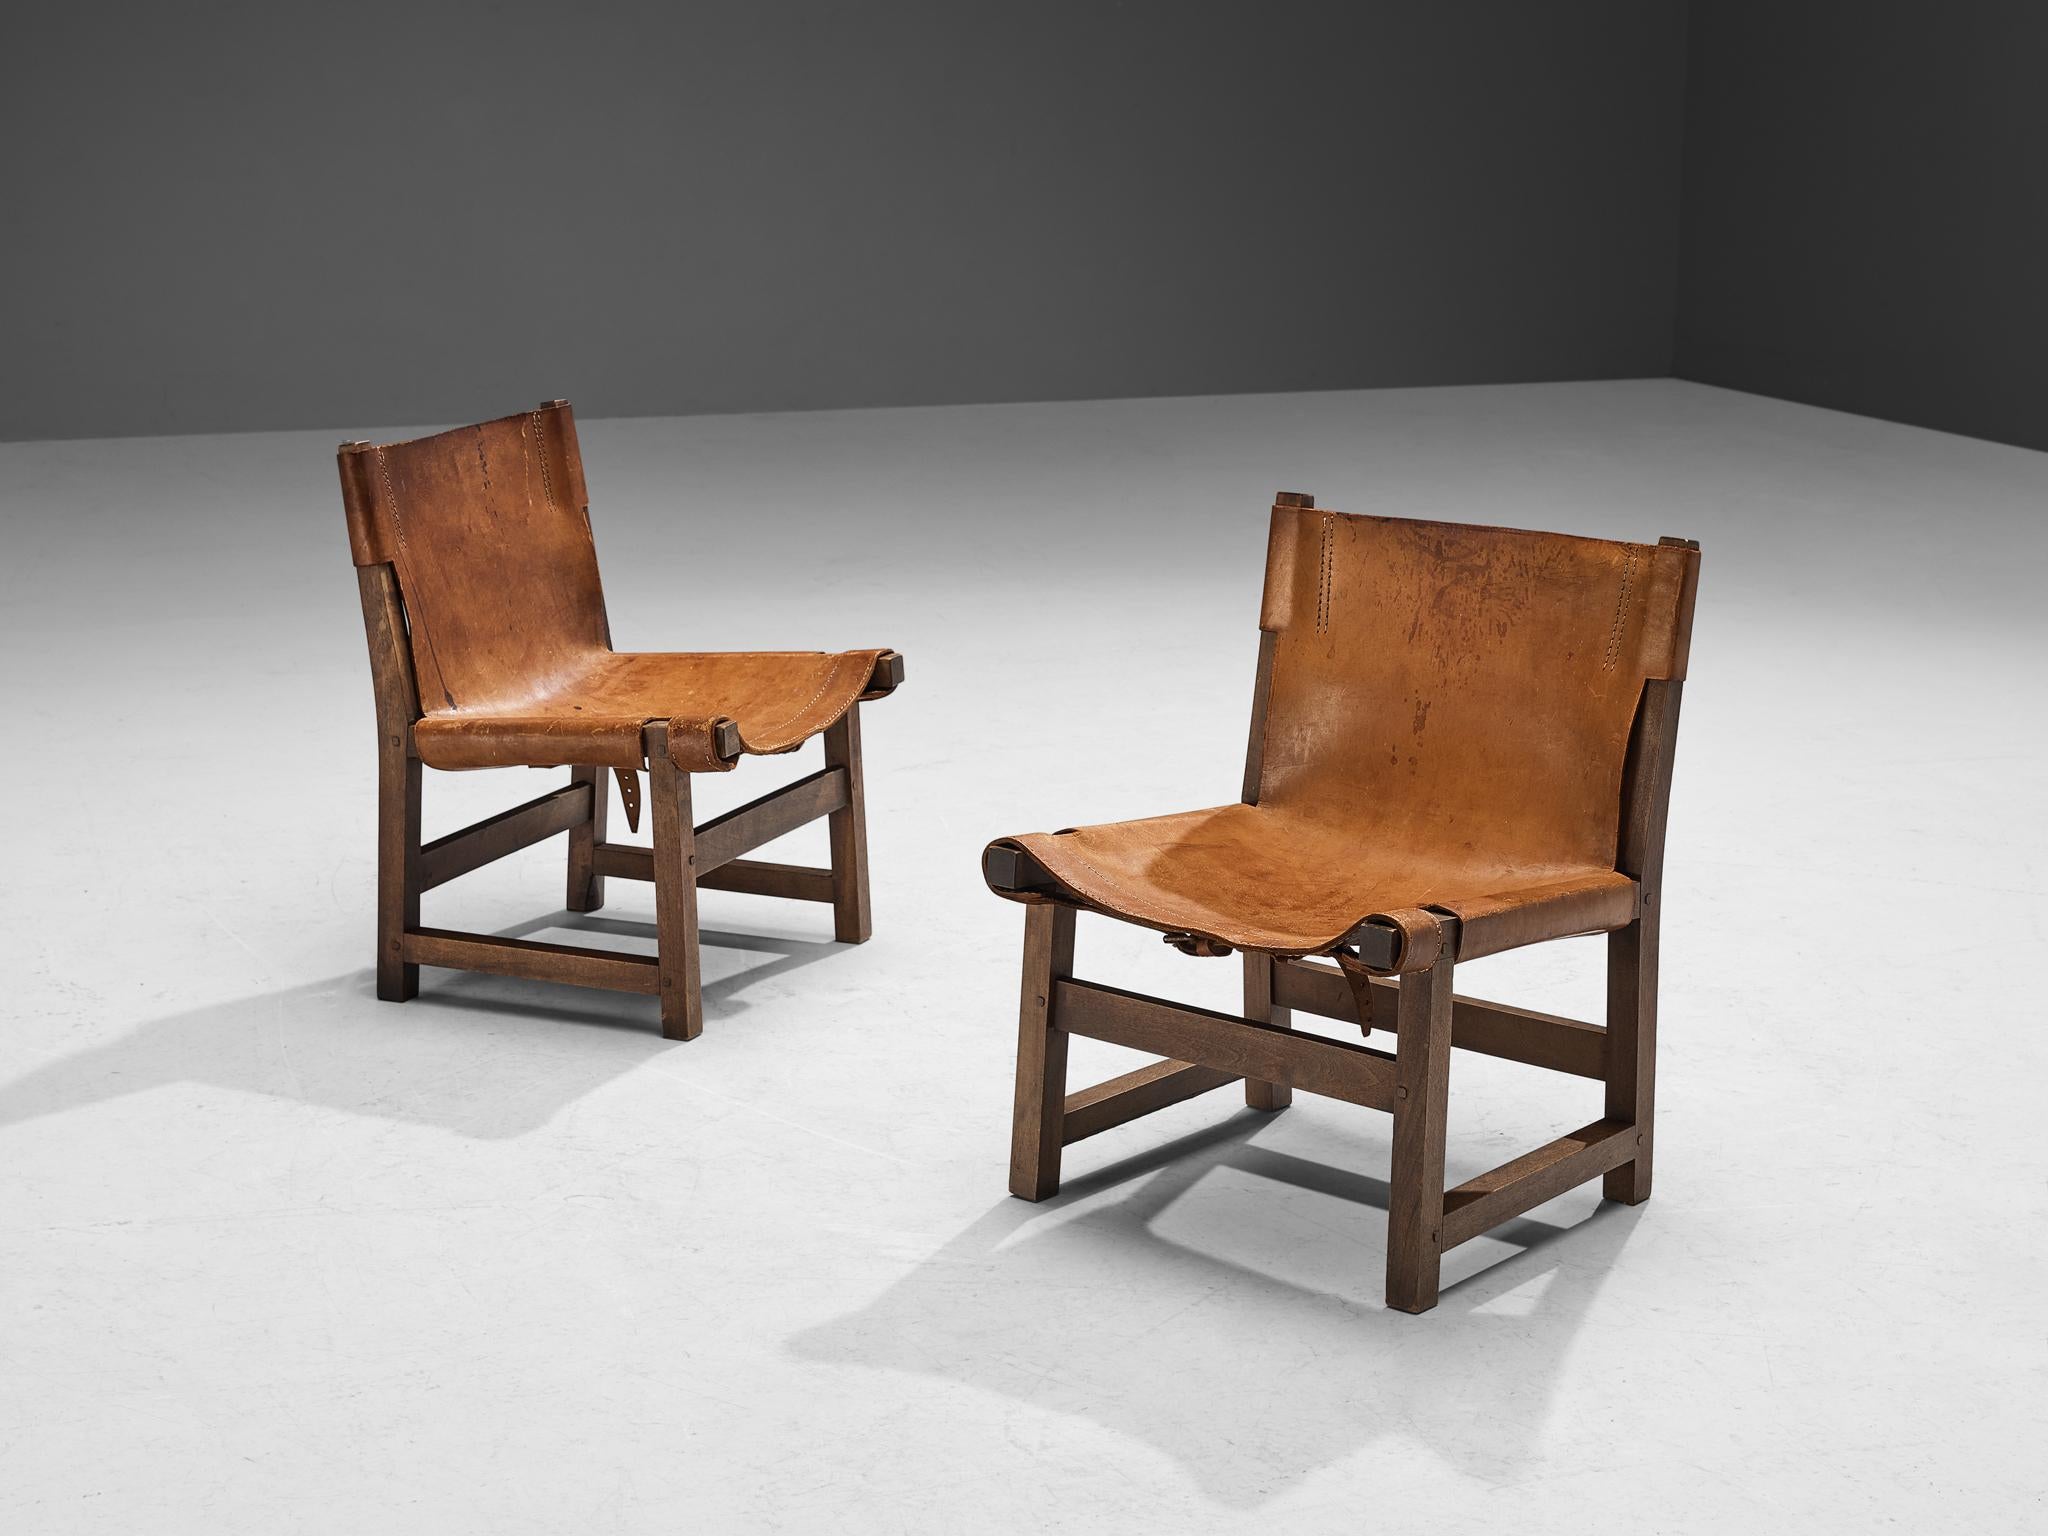 Paco Muñoz for Darro, pair of 'Riaza' chairs for children, walnut, leather, metal, Spain, 1960s

This robust low lounge chair, designed by Paco Muñoz in the 1960s, exemplifies the classic hunting chair style. Its design features leather that is